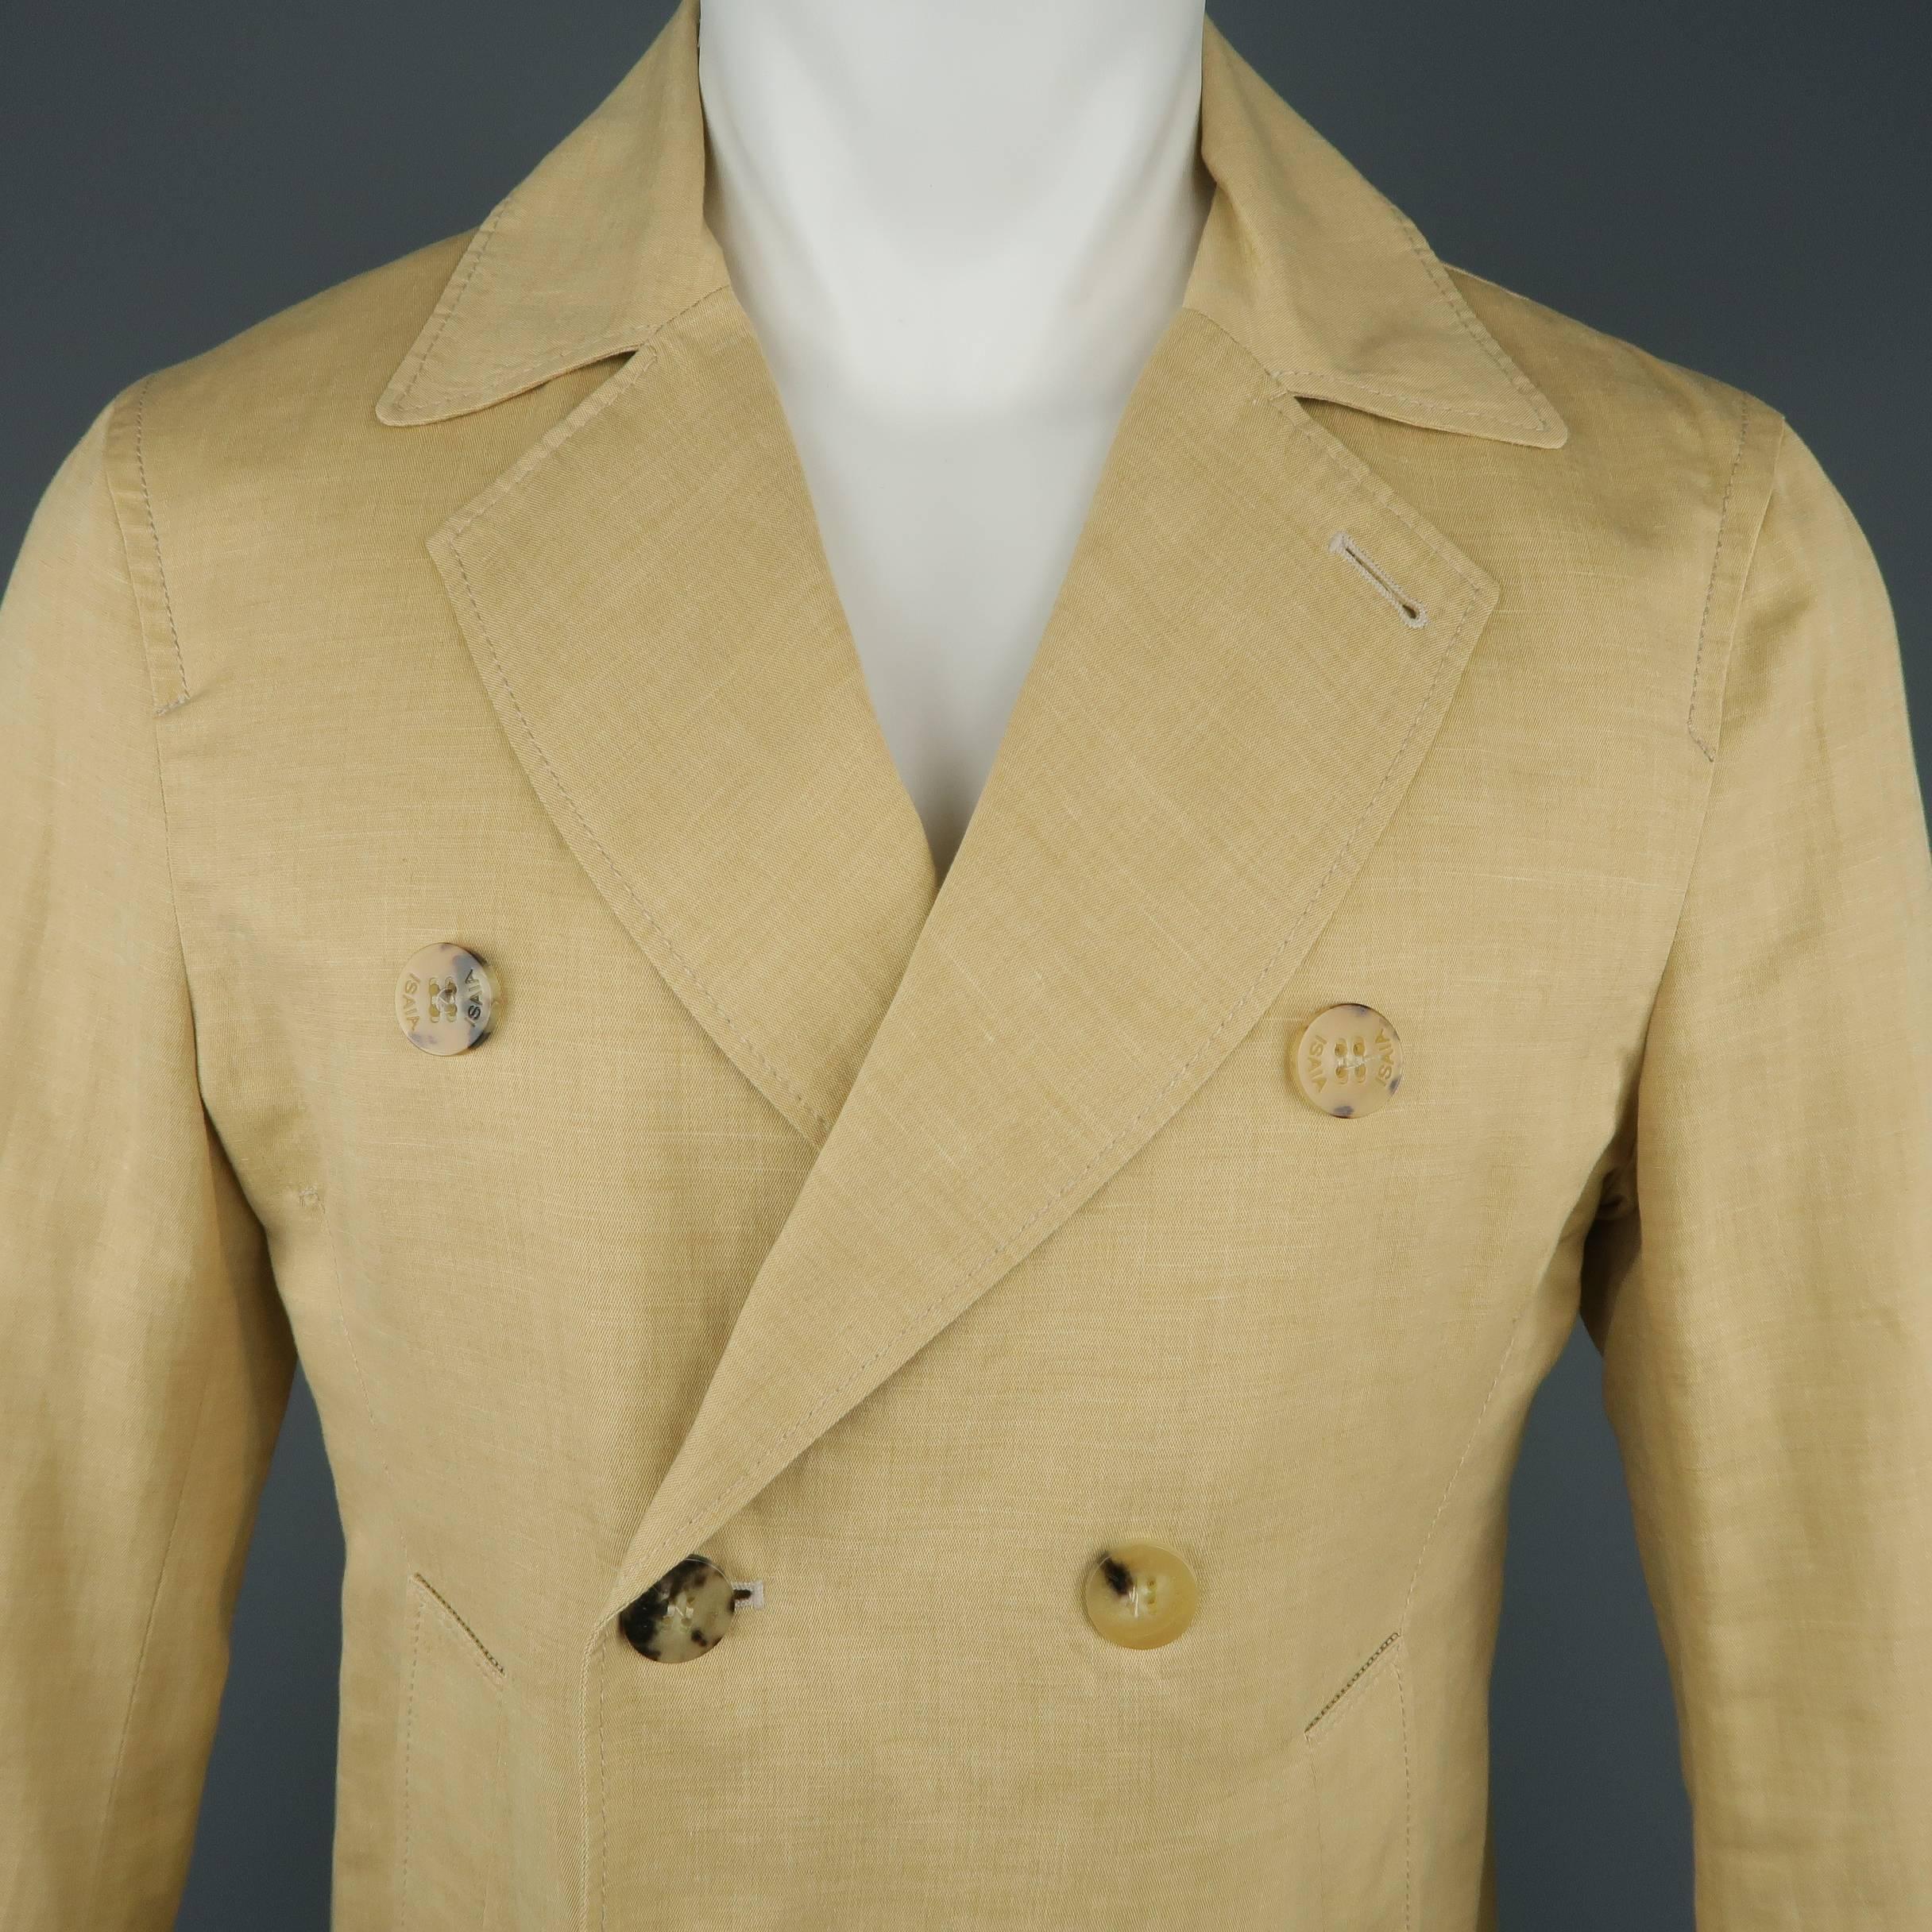 ISAIA spring weight double breasted peacoat comes in a tan khaki cotton linen blend chambray with a pointed collar lapel, and slanted pockets. Made in Italy.
 
Good Pre-Owned Condition.
Marked: IT 50
 
Measurements:
 
Shoulder: 18 in.
Chest: 42